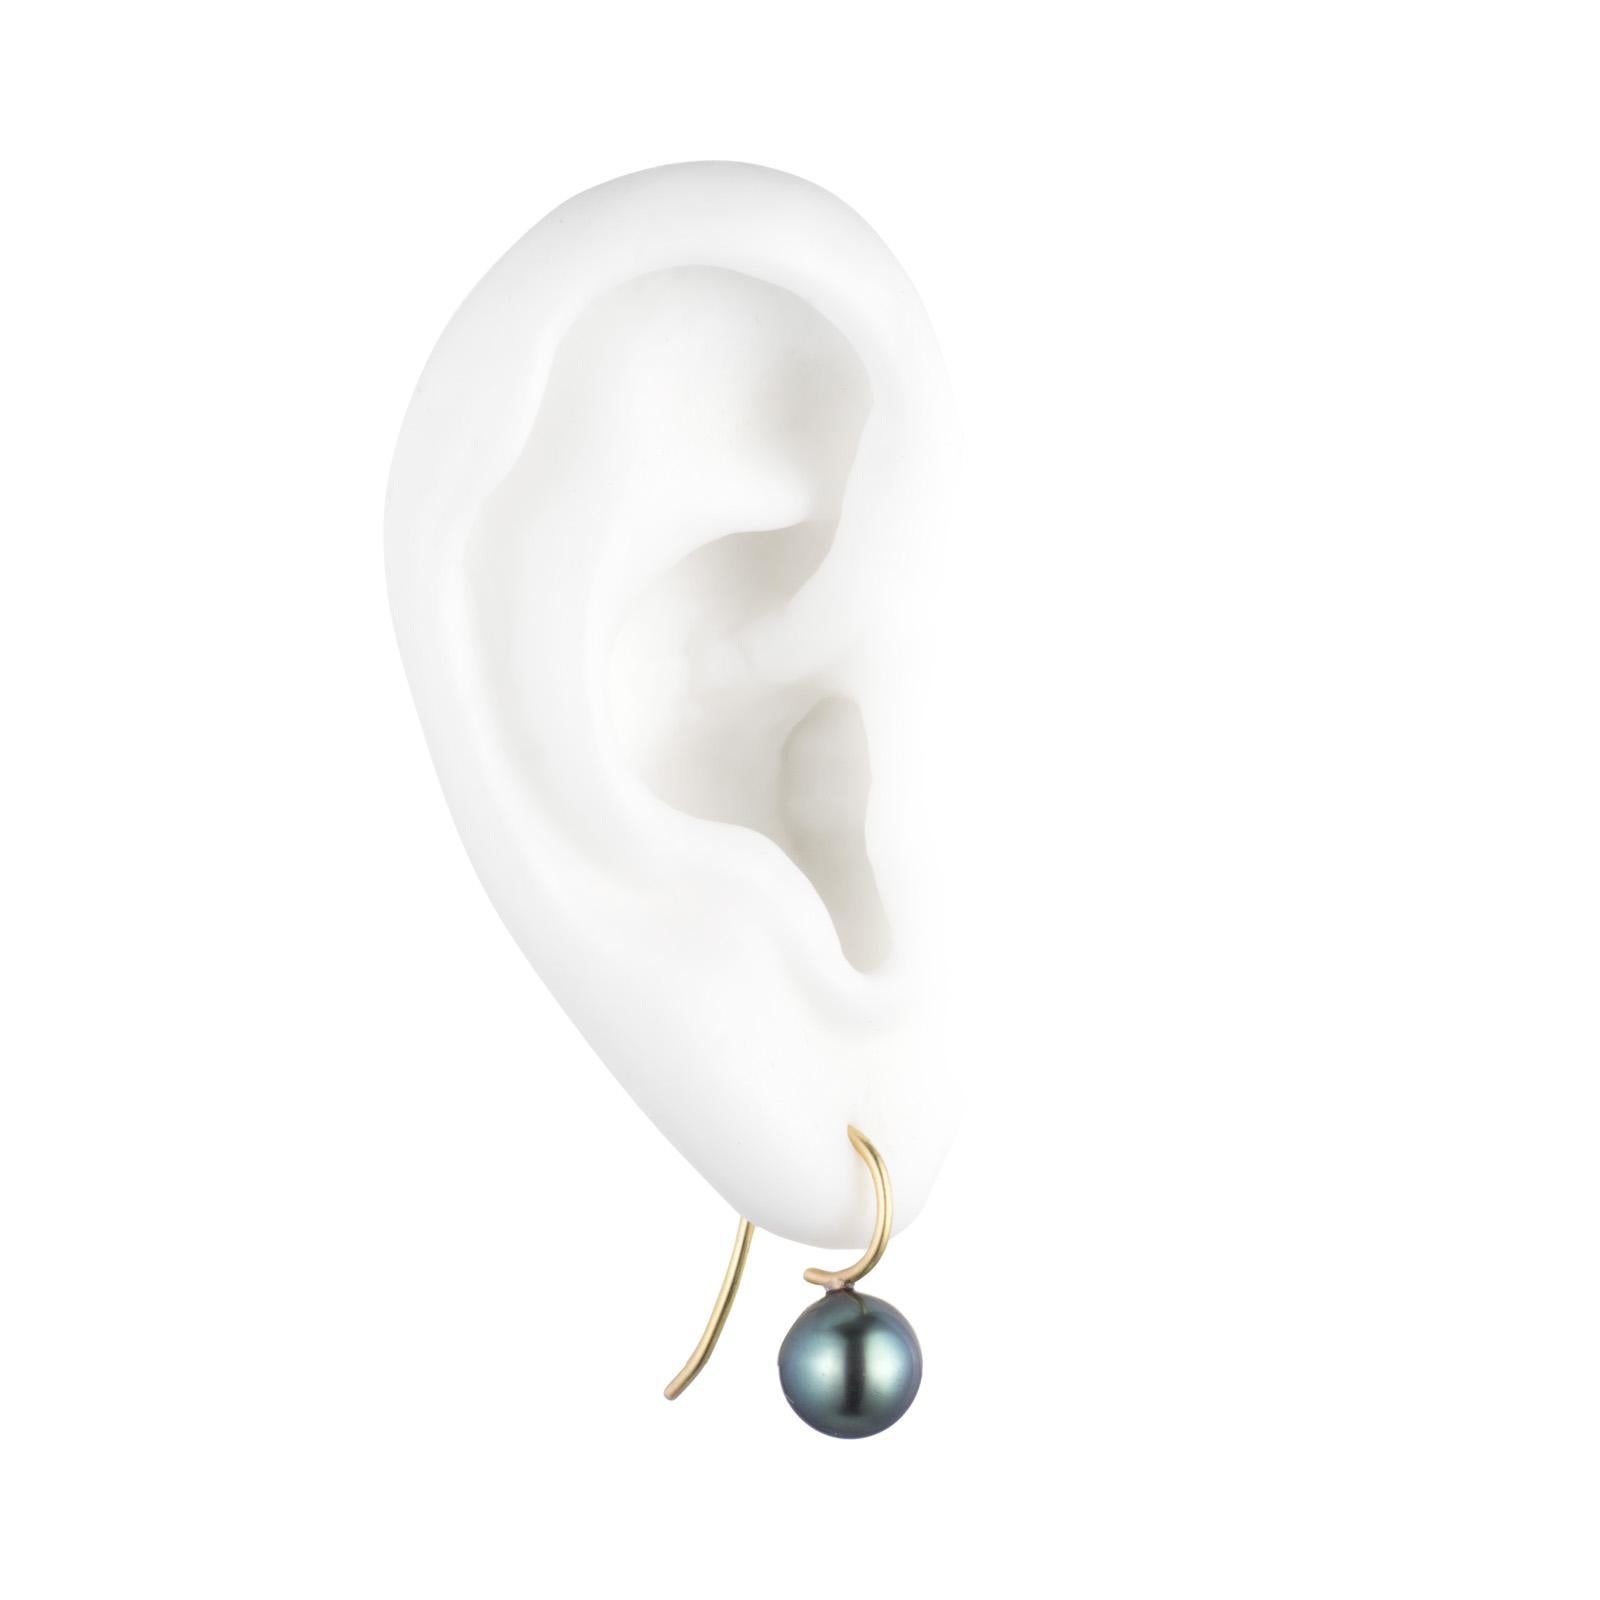 Our delicate & daintiest version of our Tahitian cultured pearl & 18K gold signature earrings. Perfect for everyday.

Description:
These range in size from approximately 8.5-9.5mm and are dark grey with a green overtone.

